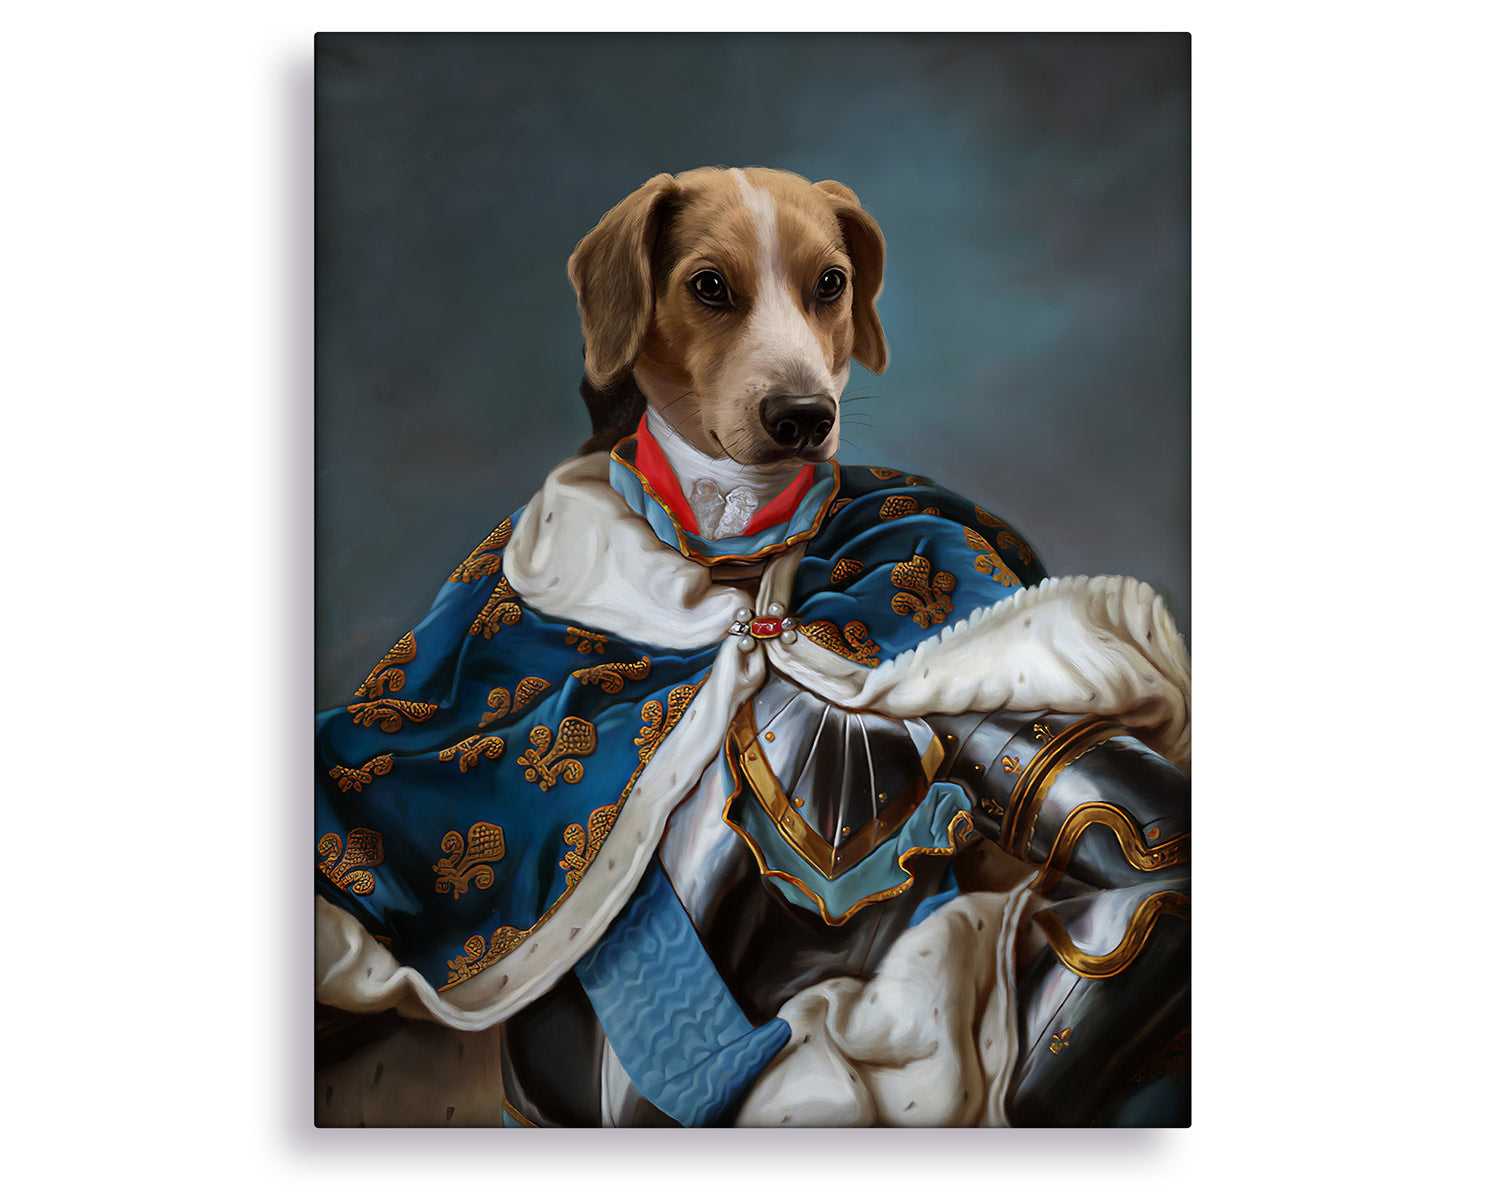 dogs painted as royalty